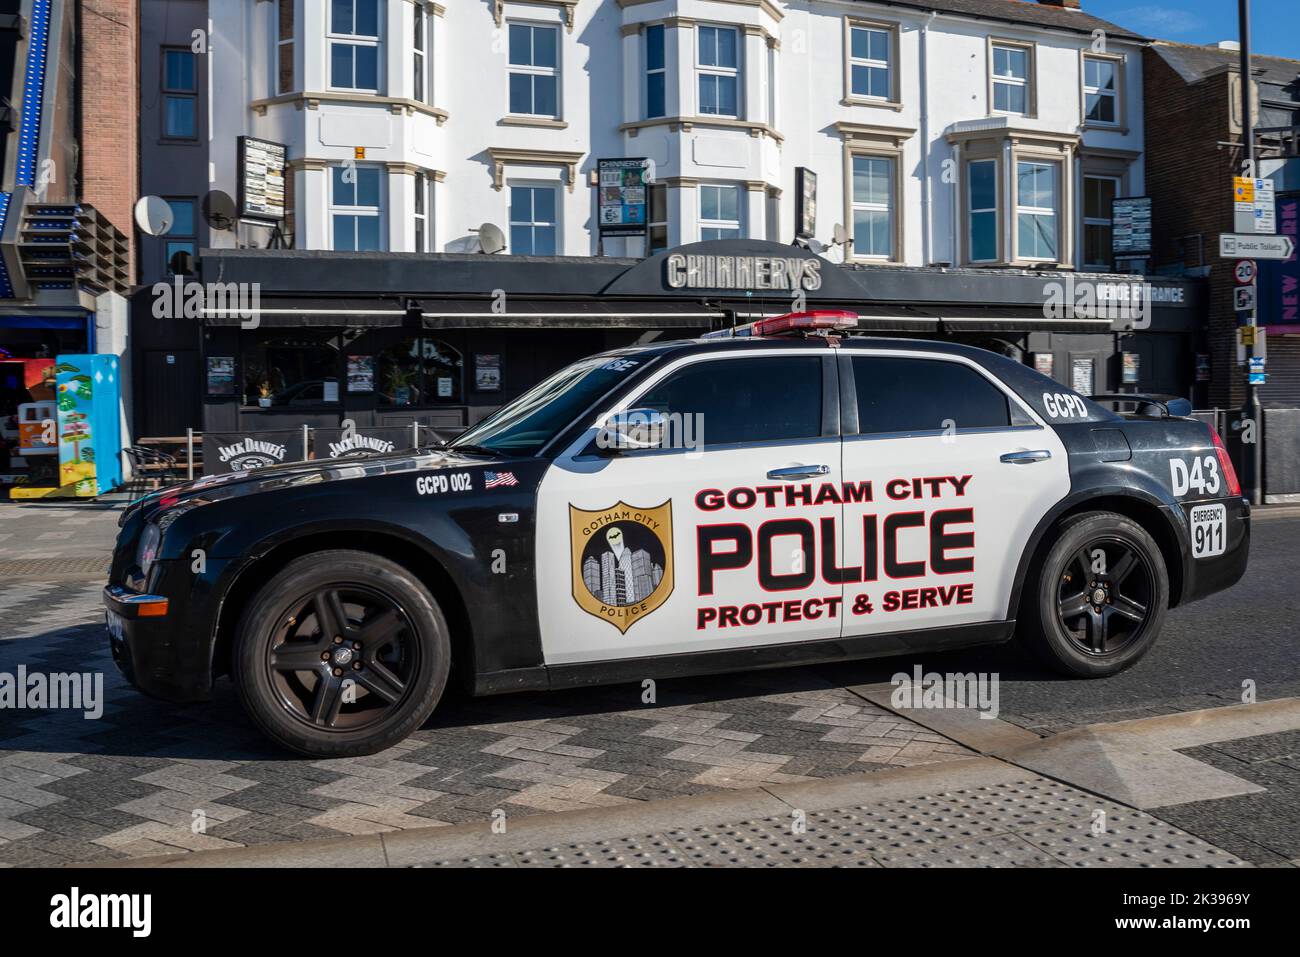 Gotham City police car marked Chrysler 300 driving on Marine Parade in Southend on Sea, Essex, UK. Badge, and protect & serve slogan Stock Photo